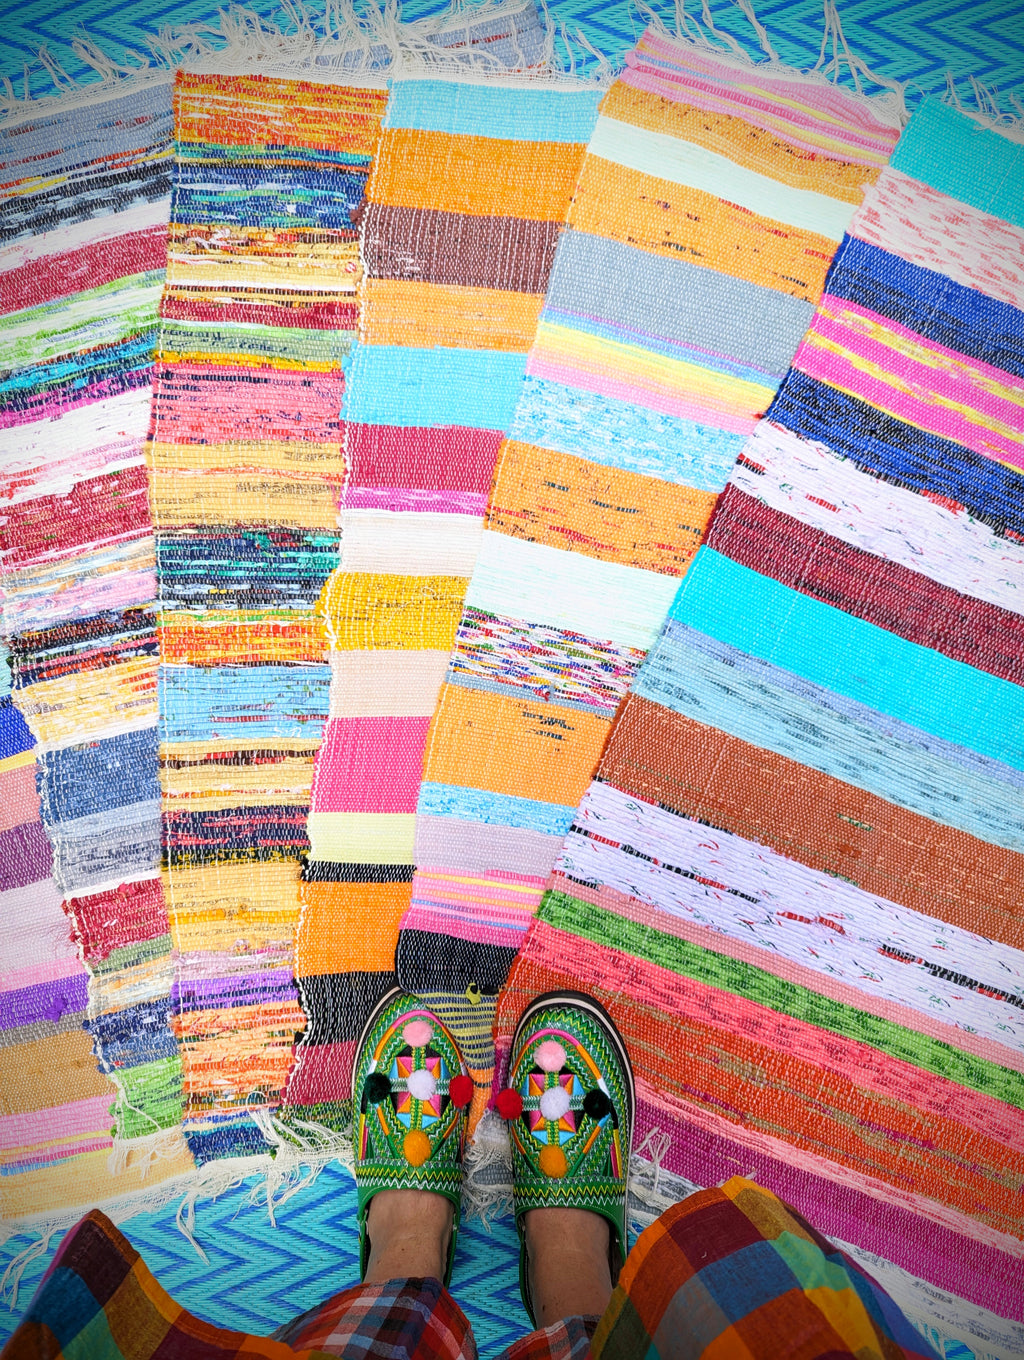 Made from surplus fabrics produced from the garment industry, these chindis are a fabulous splash of colour to a multitude of spaces and purposes! Great on the floor as a bath, door or floor mat or as a chair saver and handily machine washable!

Due to their reuse and recycle nature, we cannot be absolutely sure about all fabrics included in each piece, so we advise either salt fixing in the
Materials commonly recycled 